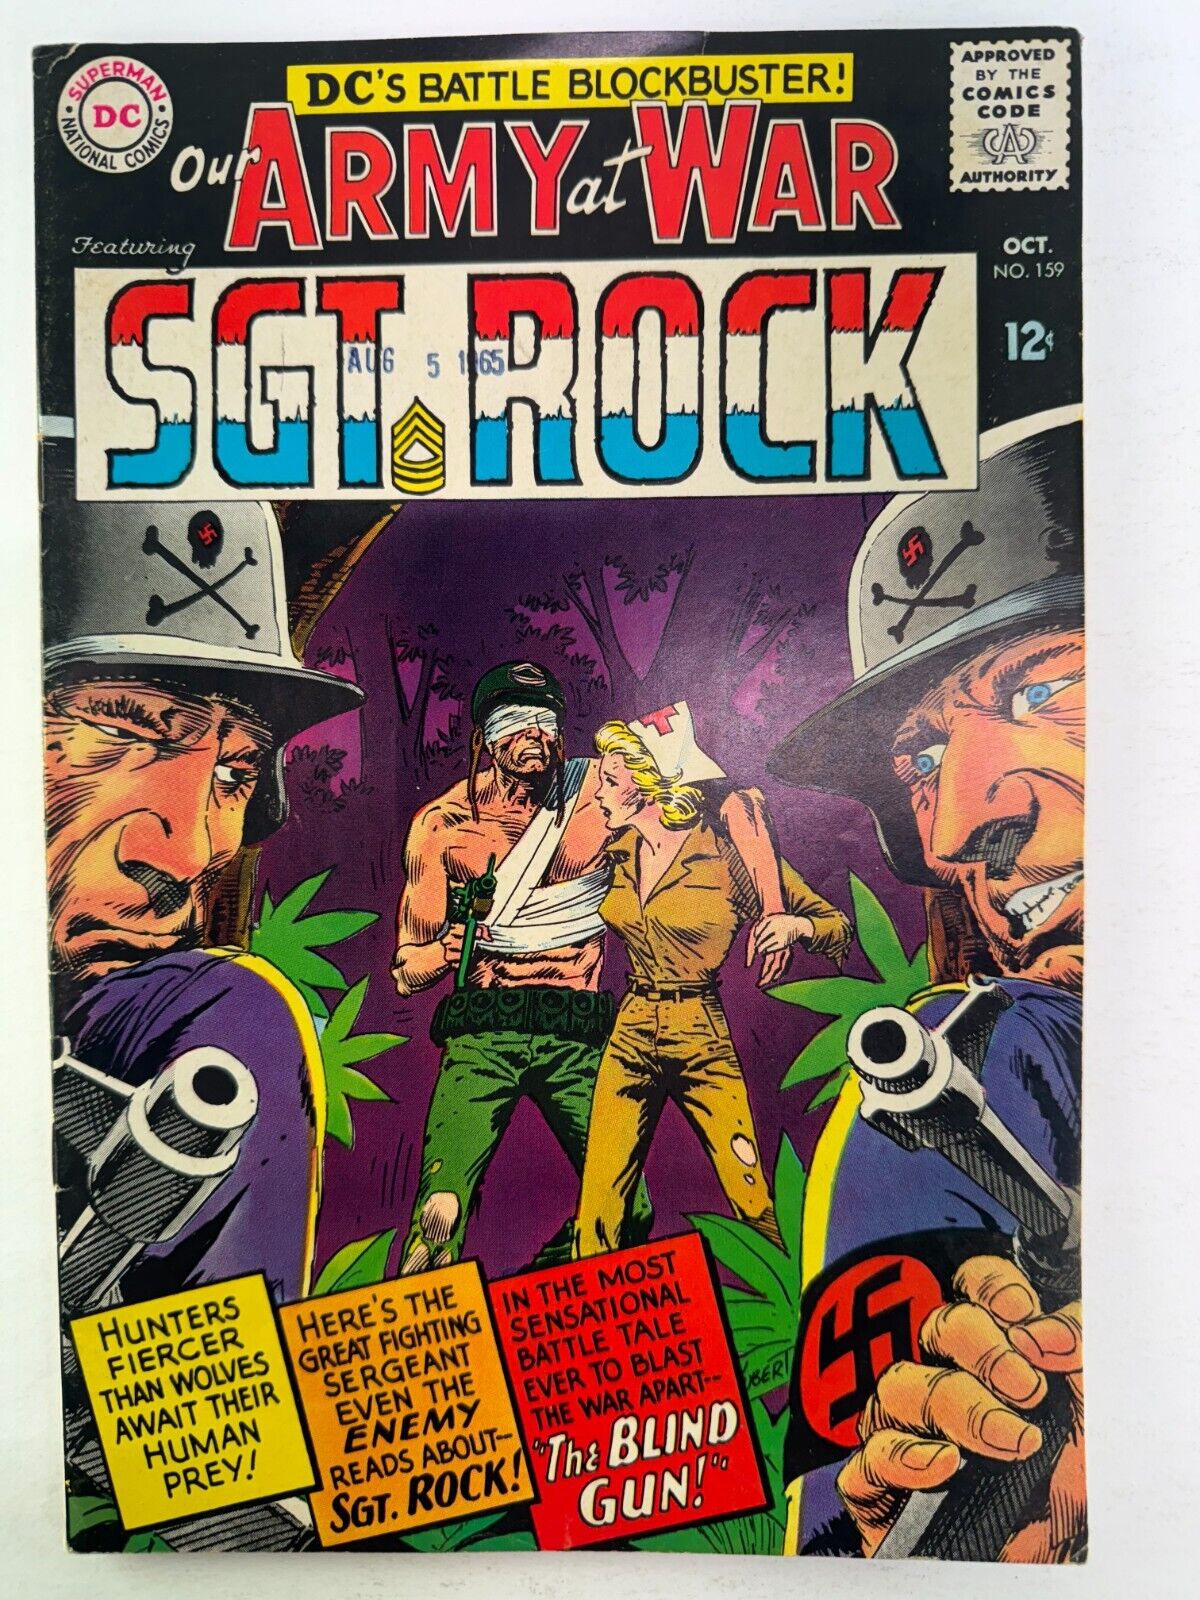 SGT ROCK : Individual DC Vintage OUR ARMY at WAR Comic Books. Choose from many